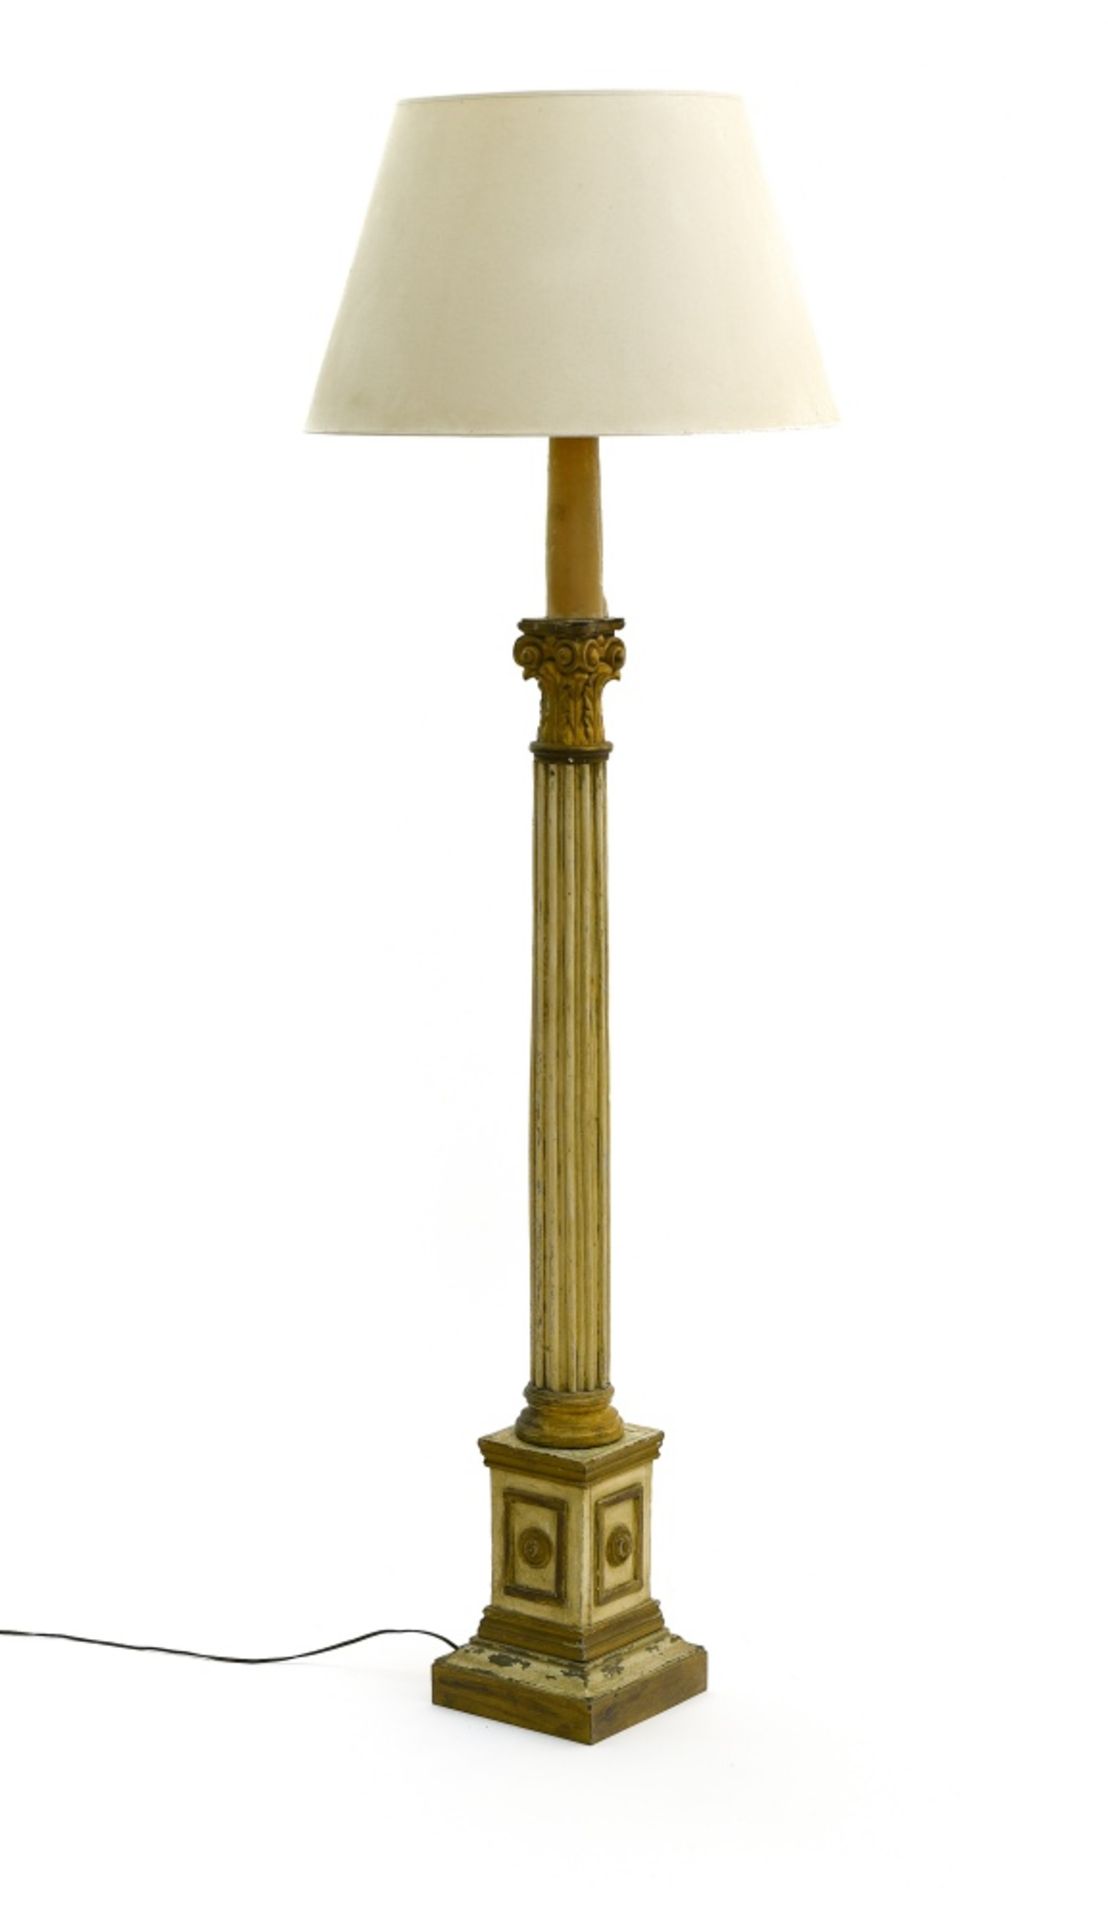 Neoclassical-style work Floor lamp, Weathered wood forming a fluted Corinthian column. Weathered